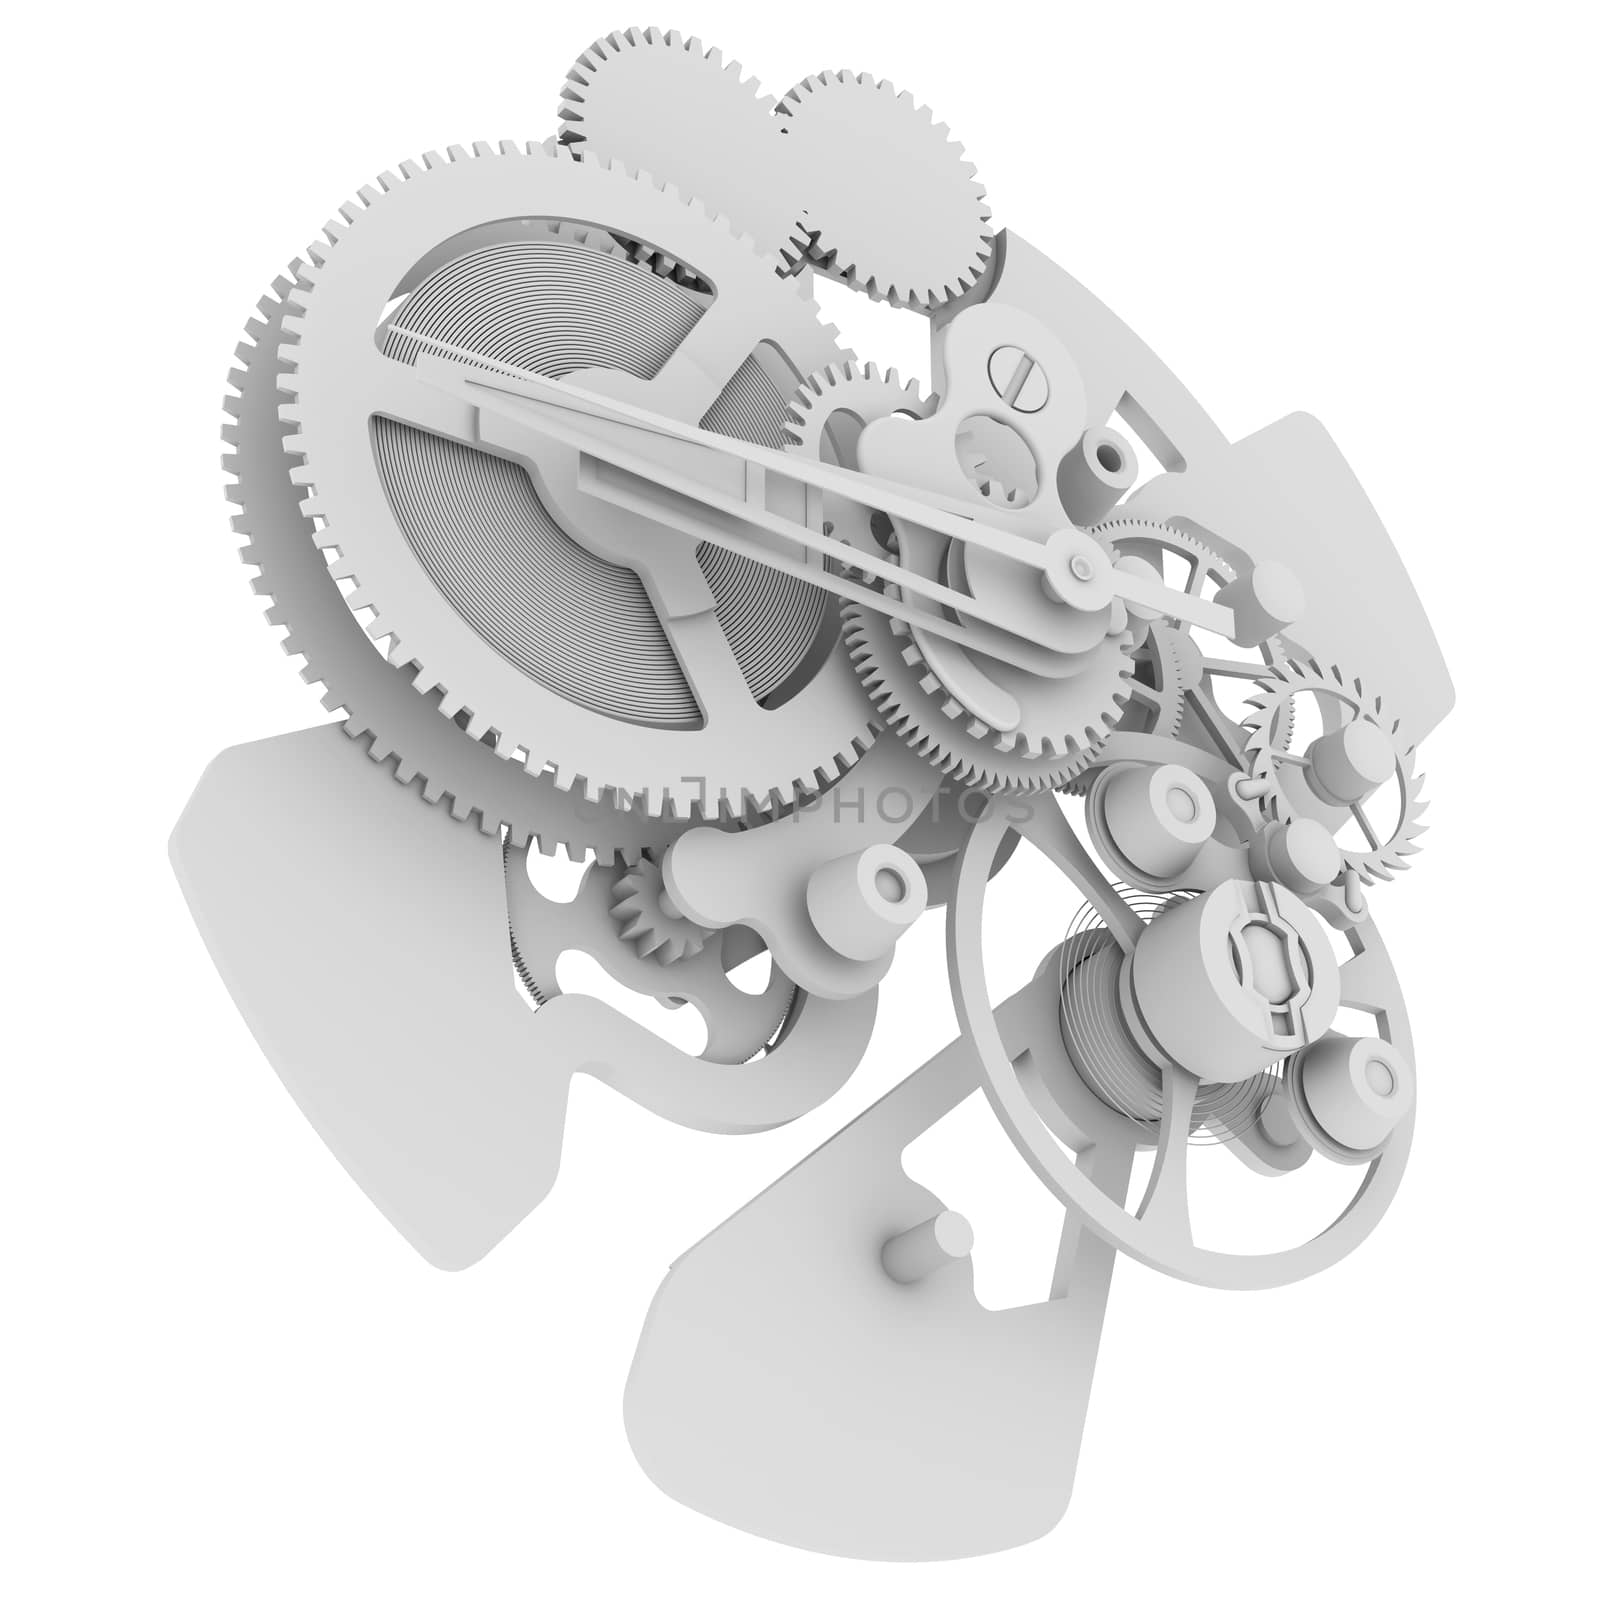 Clock mechanism. Isolated render on a white background